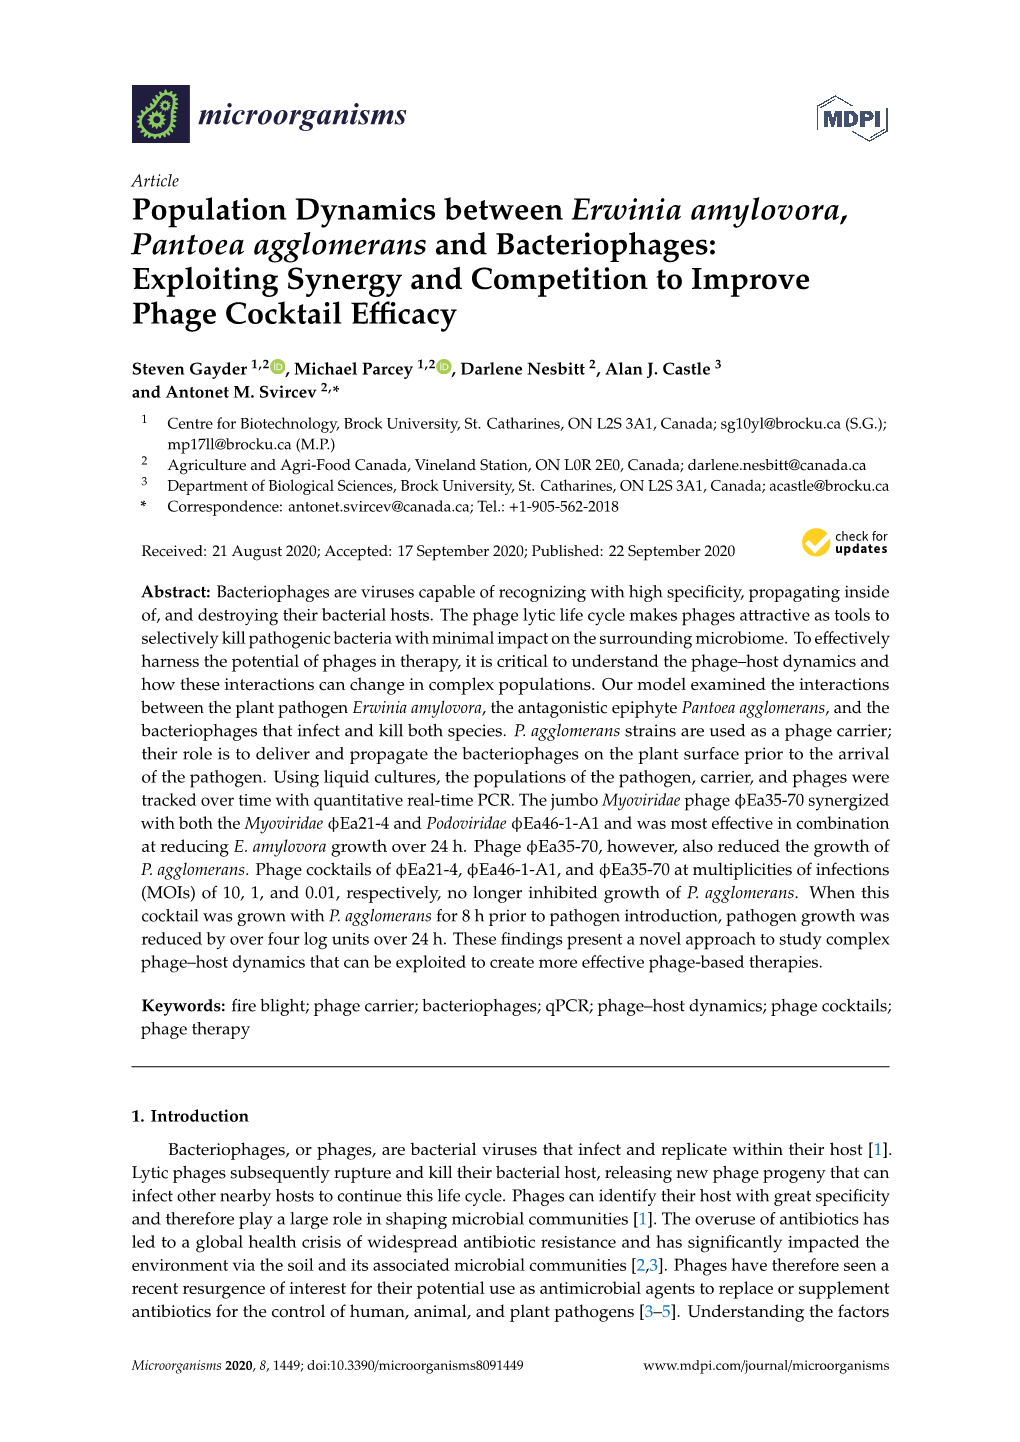 Population Dynamics Between Erwinia Amylovora, Pantoea Agglomerans and Bacteriophages: Exploiting Synergy and Competition to Improve Phage Cocktail Eﬃcacy